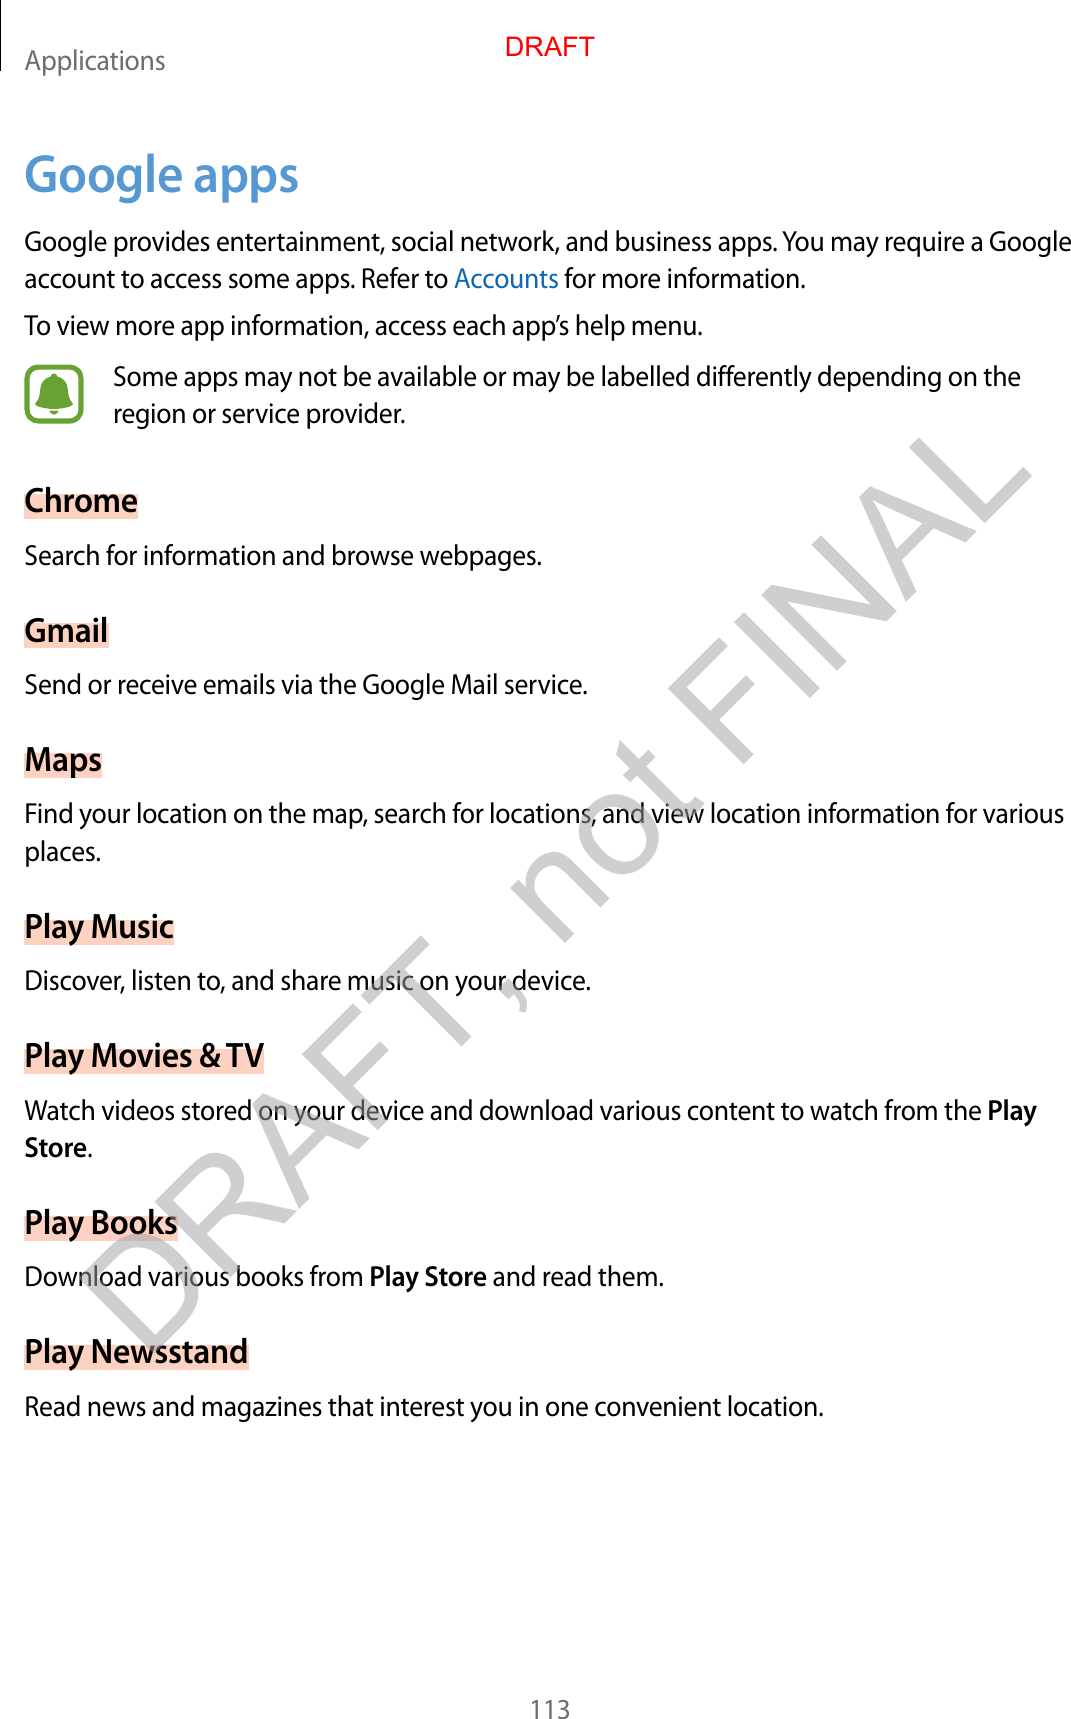 Applications113Google appsGoogle provides ent ertainment, social network, and business apps. You may requir e a Google account t o ac cess some apps . Ref er t o Accounts for mor e inf ormation.To view more app inf ormation, ac cess each app’s help menu.Some apps may not be available or ma y be labelled diff er en tly depending on the region or service provider.ChromeSearch for information and browse w ebpages .GmailSend or receiv e emails via the Google Mail service.MapsF ind y our loca tion on the map, search f or locations , and view location information for various places.Play MusicDiscov er, listen to, and share music on your devic e .Play Mo vies &amp; TVWatch videos stor ed on y our device and do wnload various c ont ent t o wat ch fr om the Play Store.Play BooksDownload various books from Play St or e and read them.Play Ne w sstandRead news and magazines that inter est y ou in one c on v enien t location.DRAFT, not FINALDRAFT